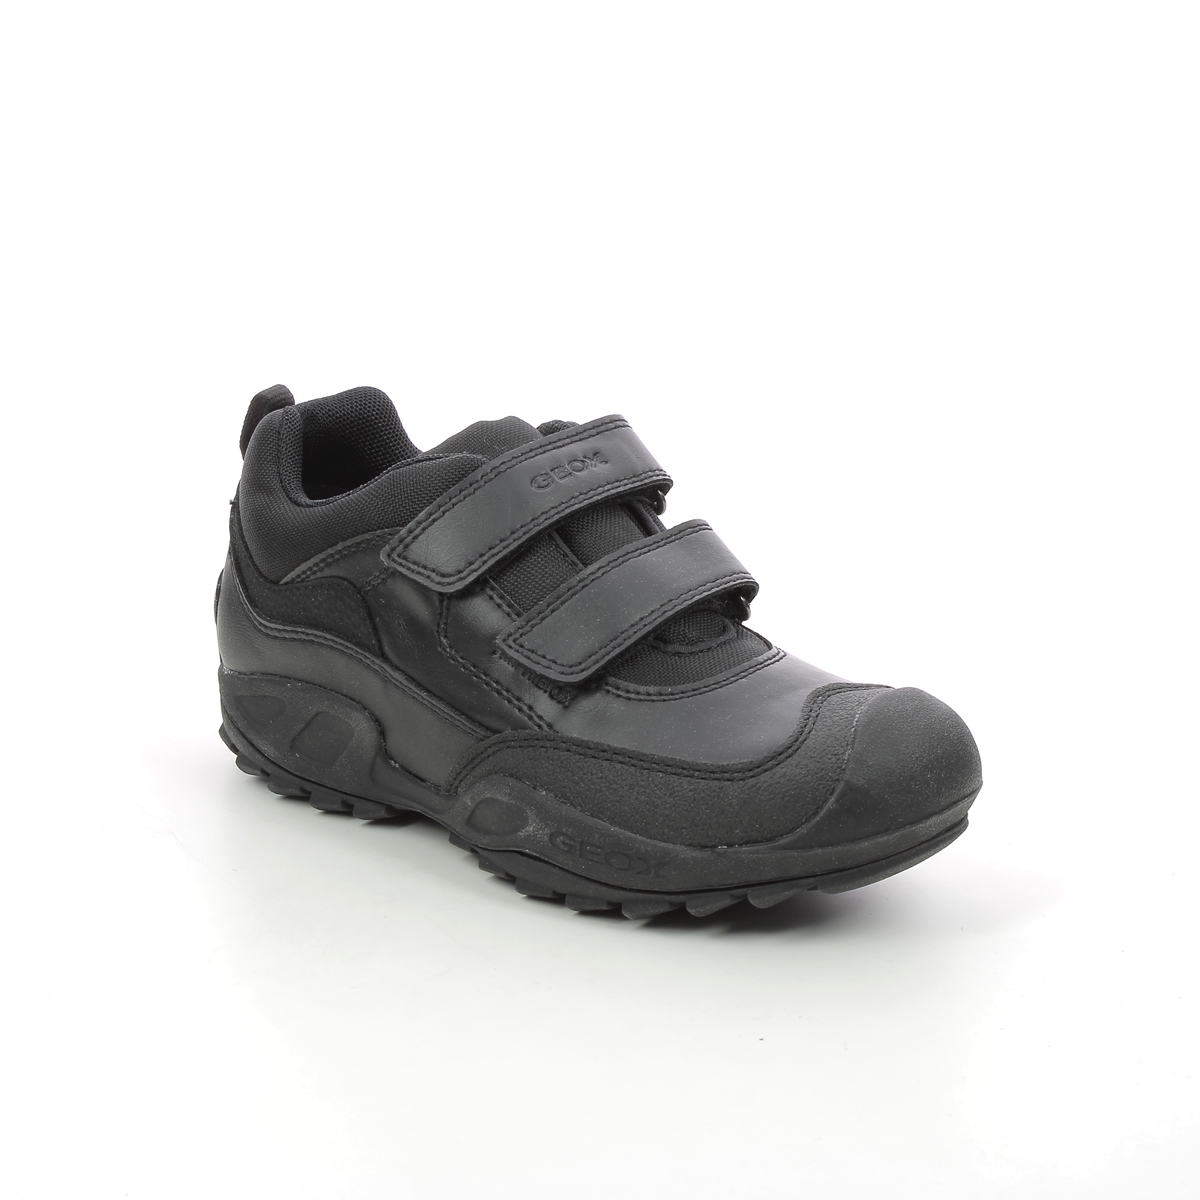 Geox - New Savage Tex (Black) J841Wb-C9999 In Size 34 In Plain Black For School For kids